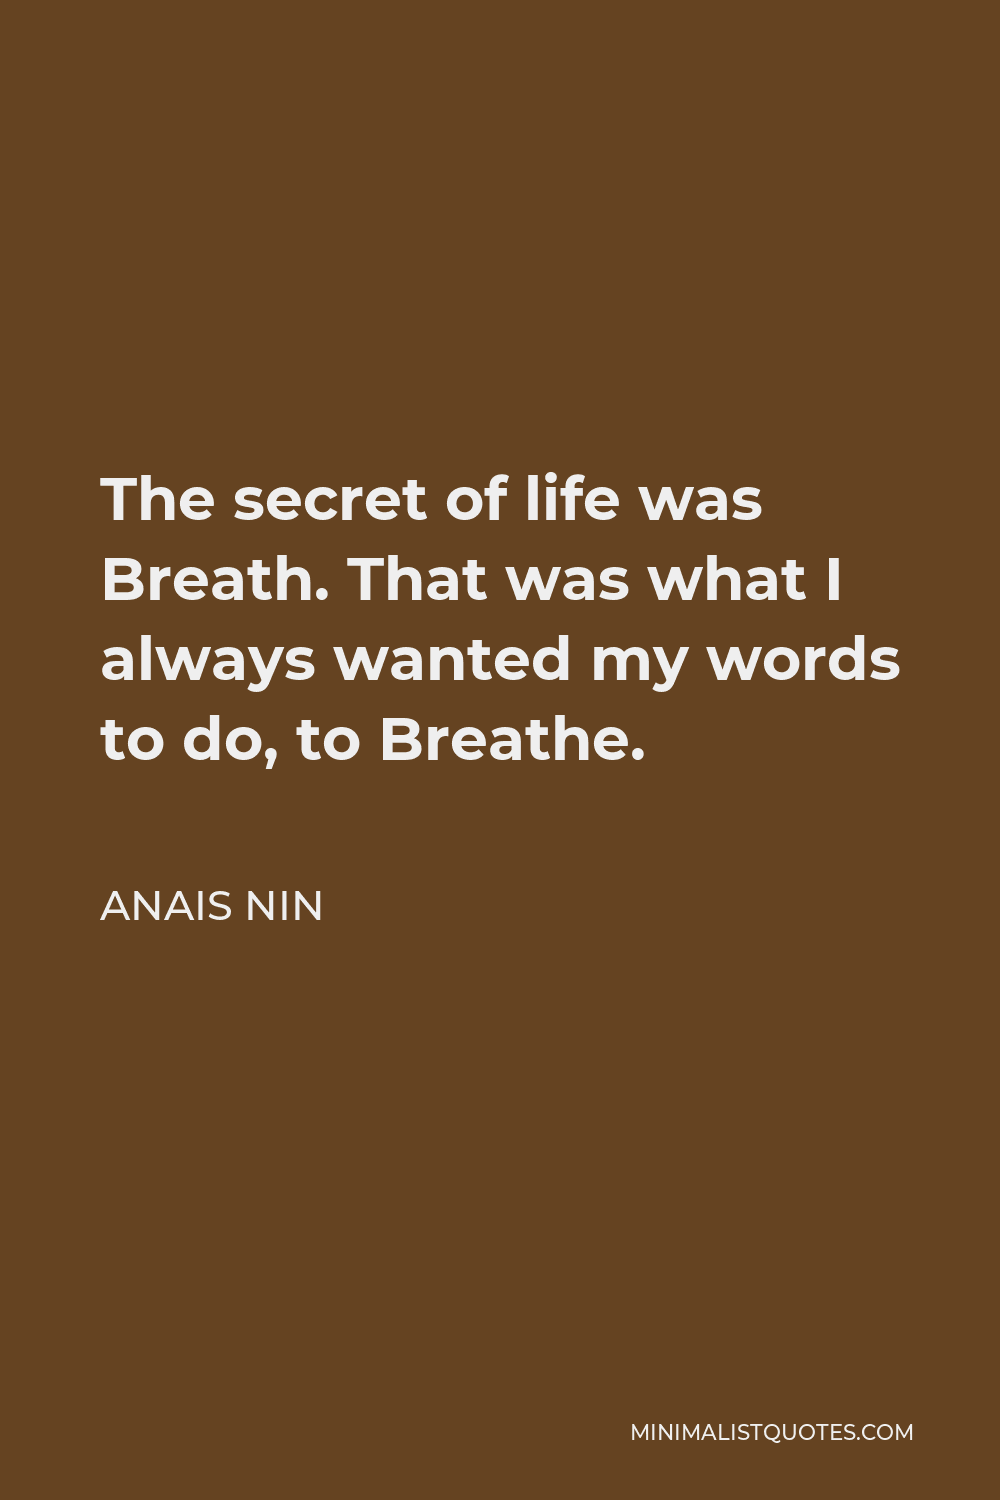 Anais Nin Quote - The secret of life was Breath. That was what I always wanted my words to do, to Breathe.